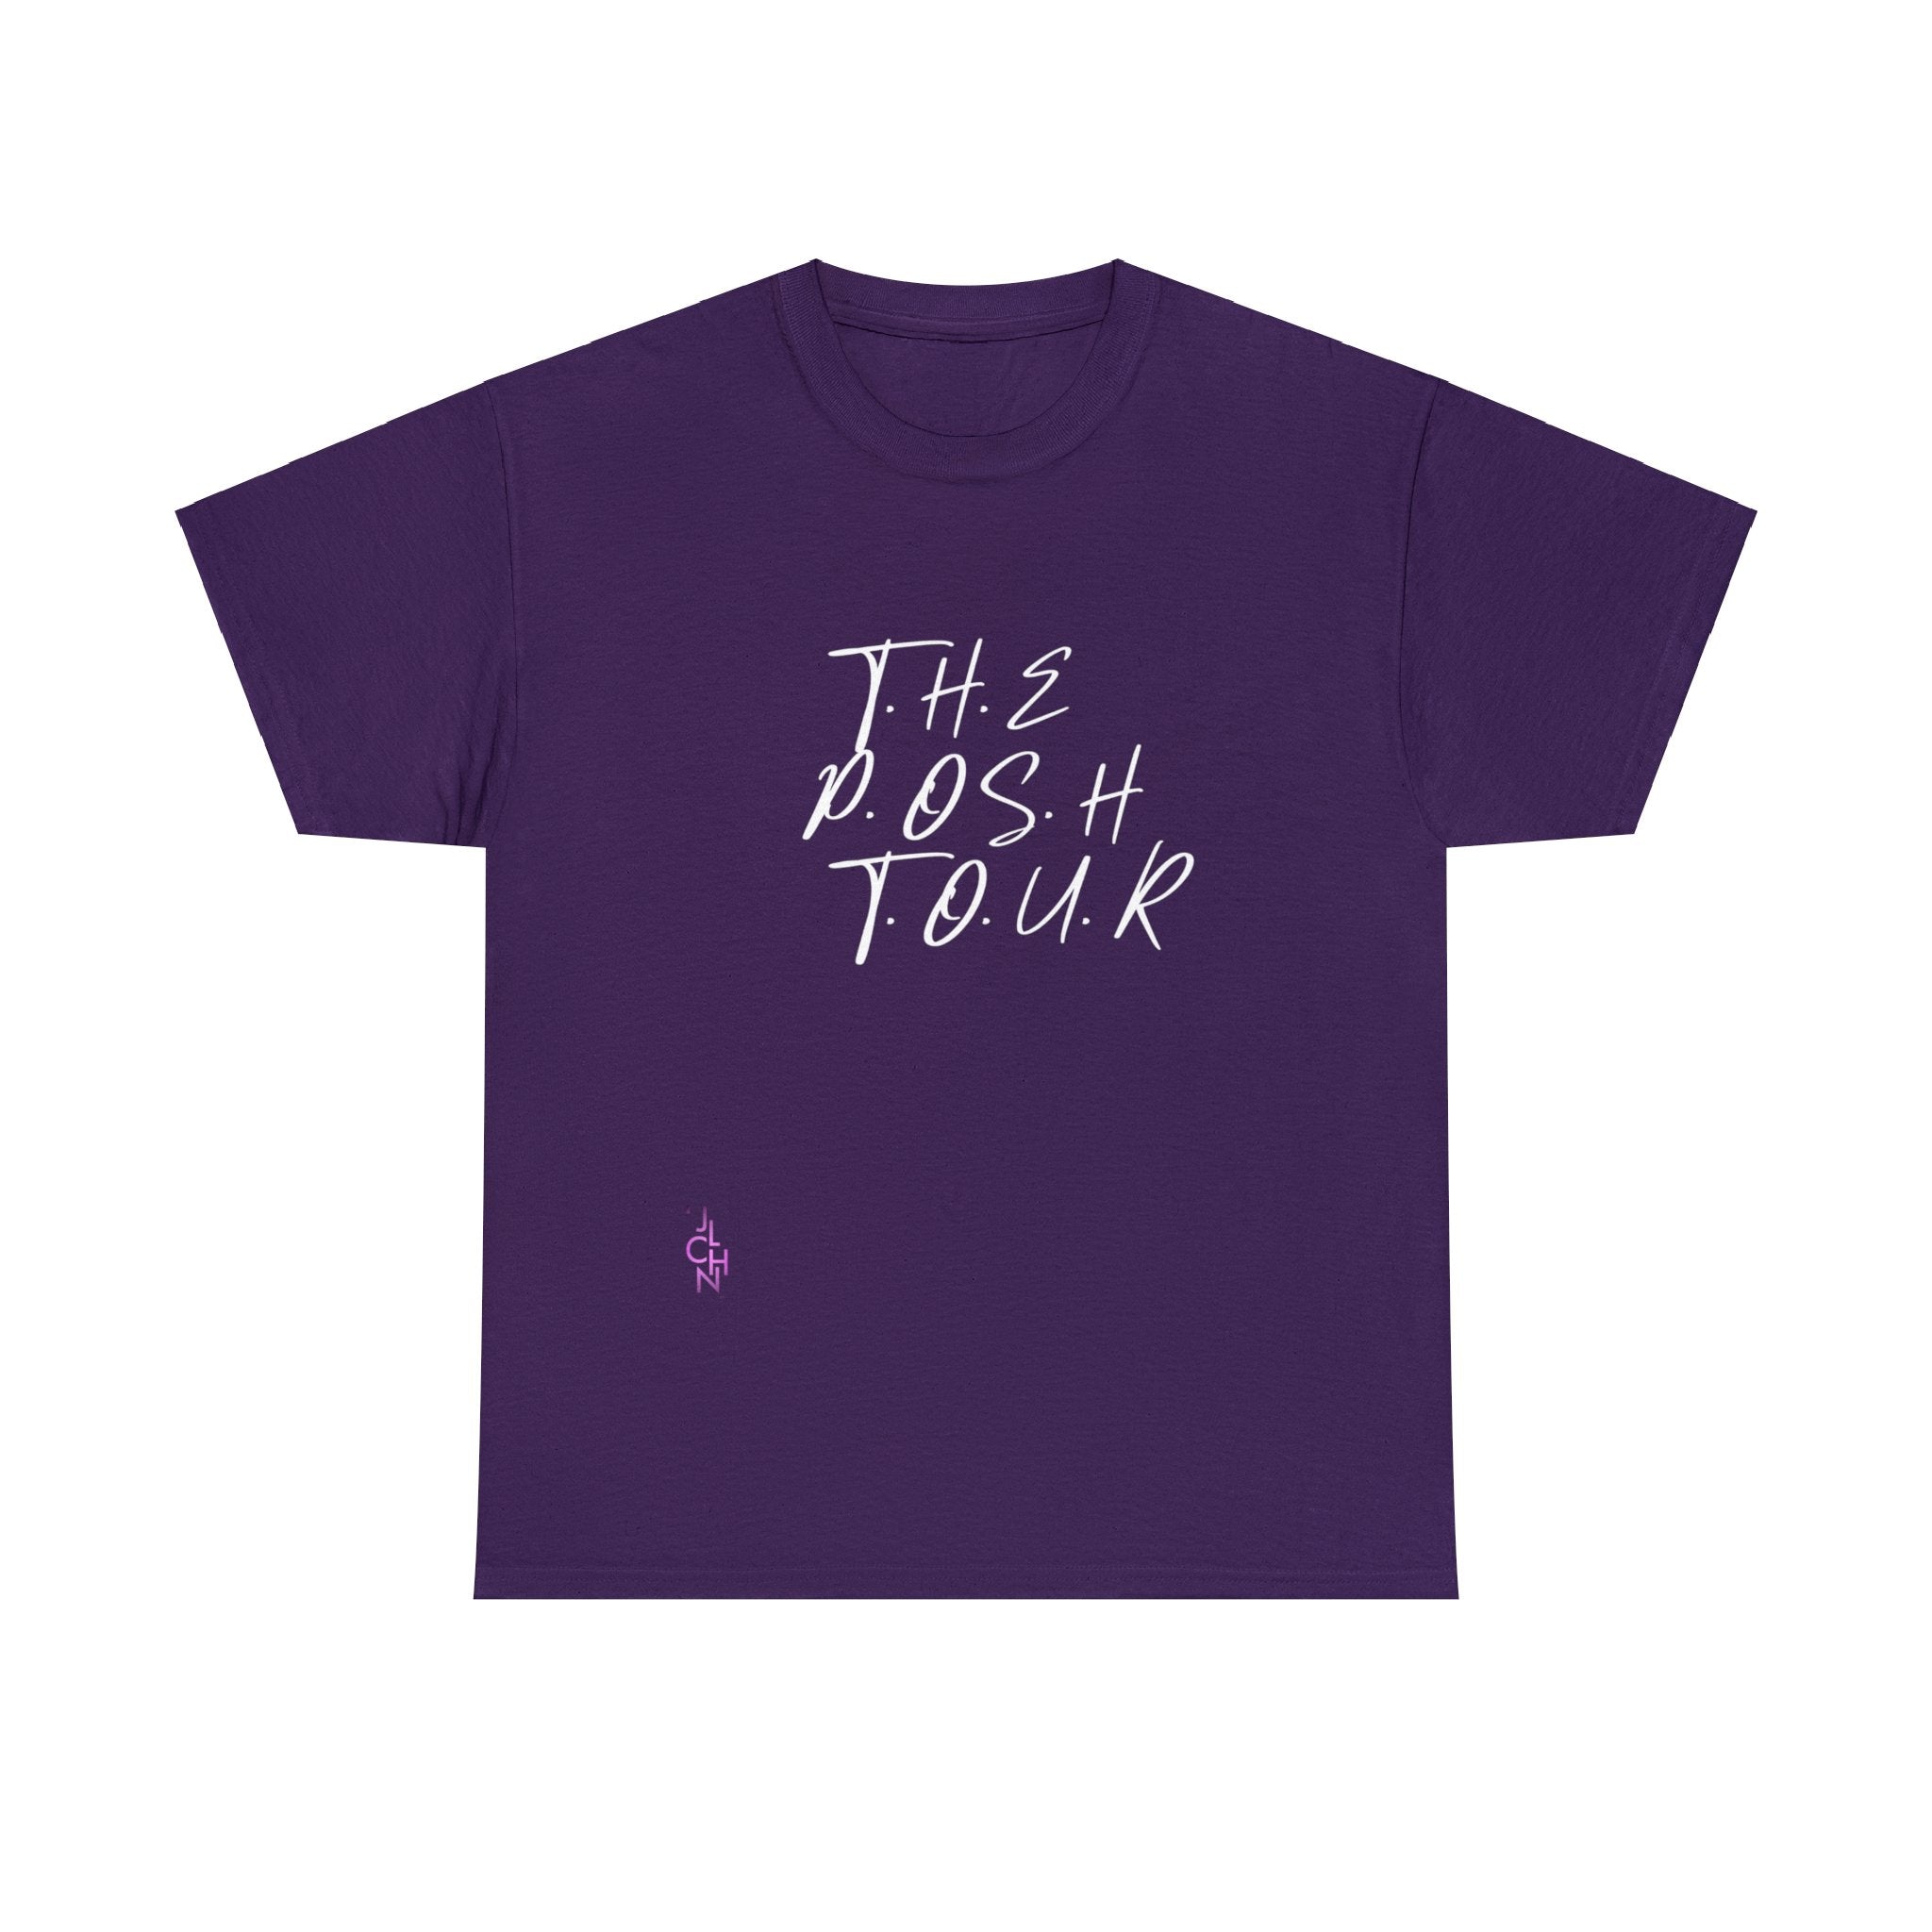 Juli Chan's 'The Posh Tour' Tee Shirt - A Symbol of Musical Passion and Style